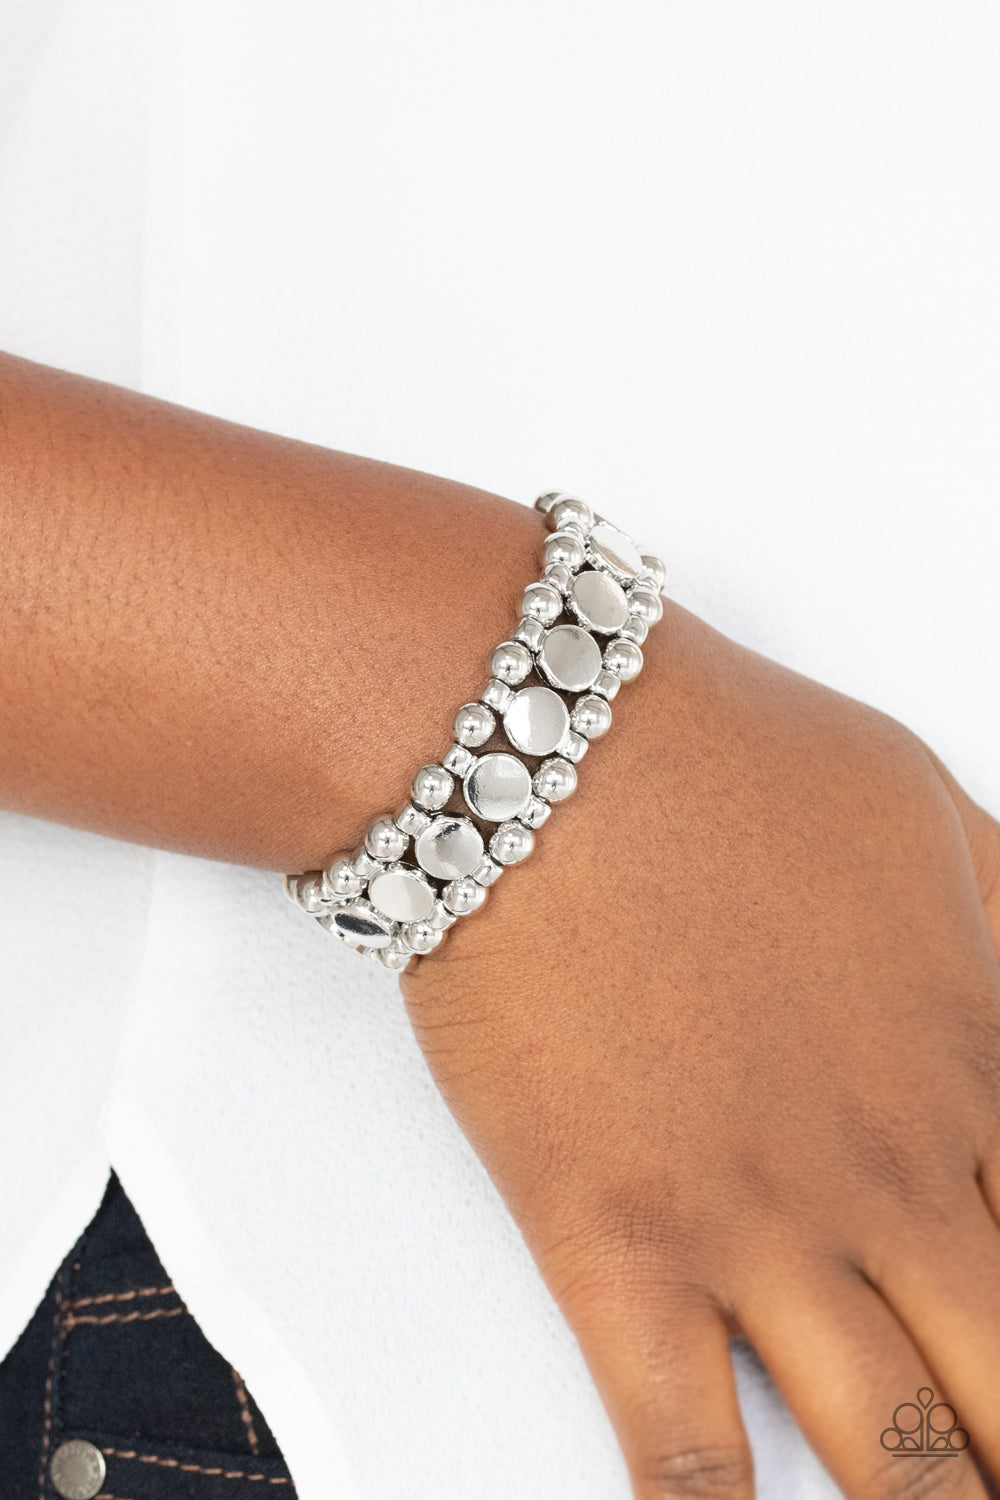 Metro Magnetism Silver Bracelet - Paparazzi Accessories  Shiny silver disc fittings and pairs of classic silver beads are threaded along stretchy bands around the wrist that connect into a bold industrial display around the wrist.  All Paparazzi Accessories are lead free and nickel free!  Sold as one individual bracelet.